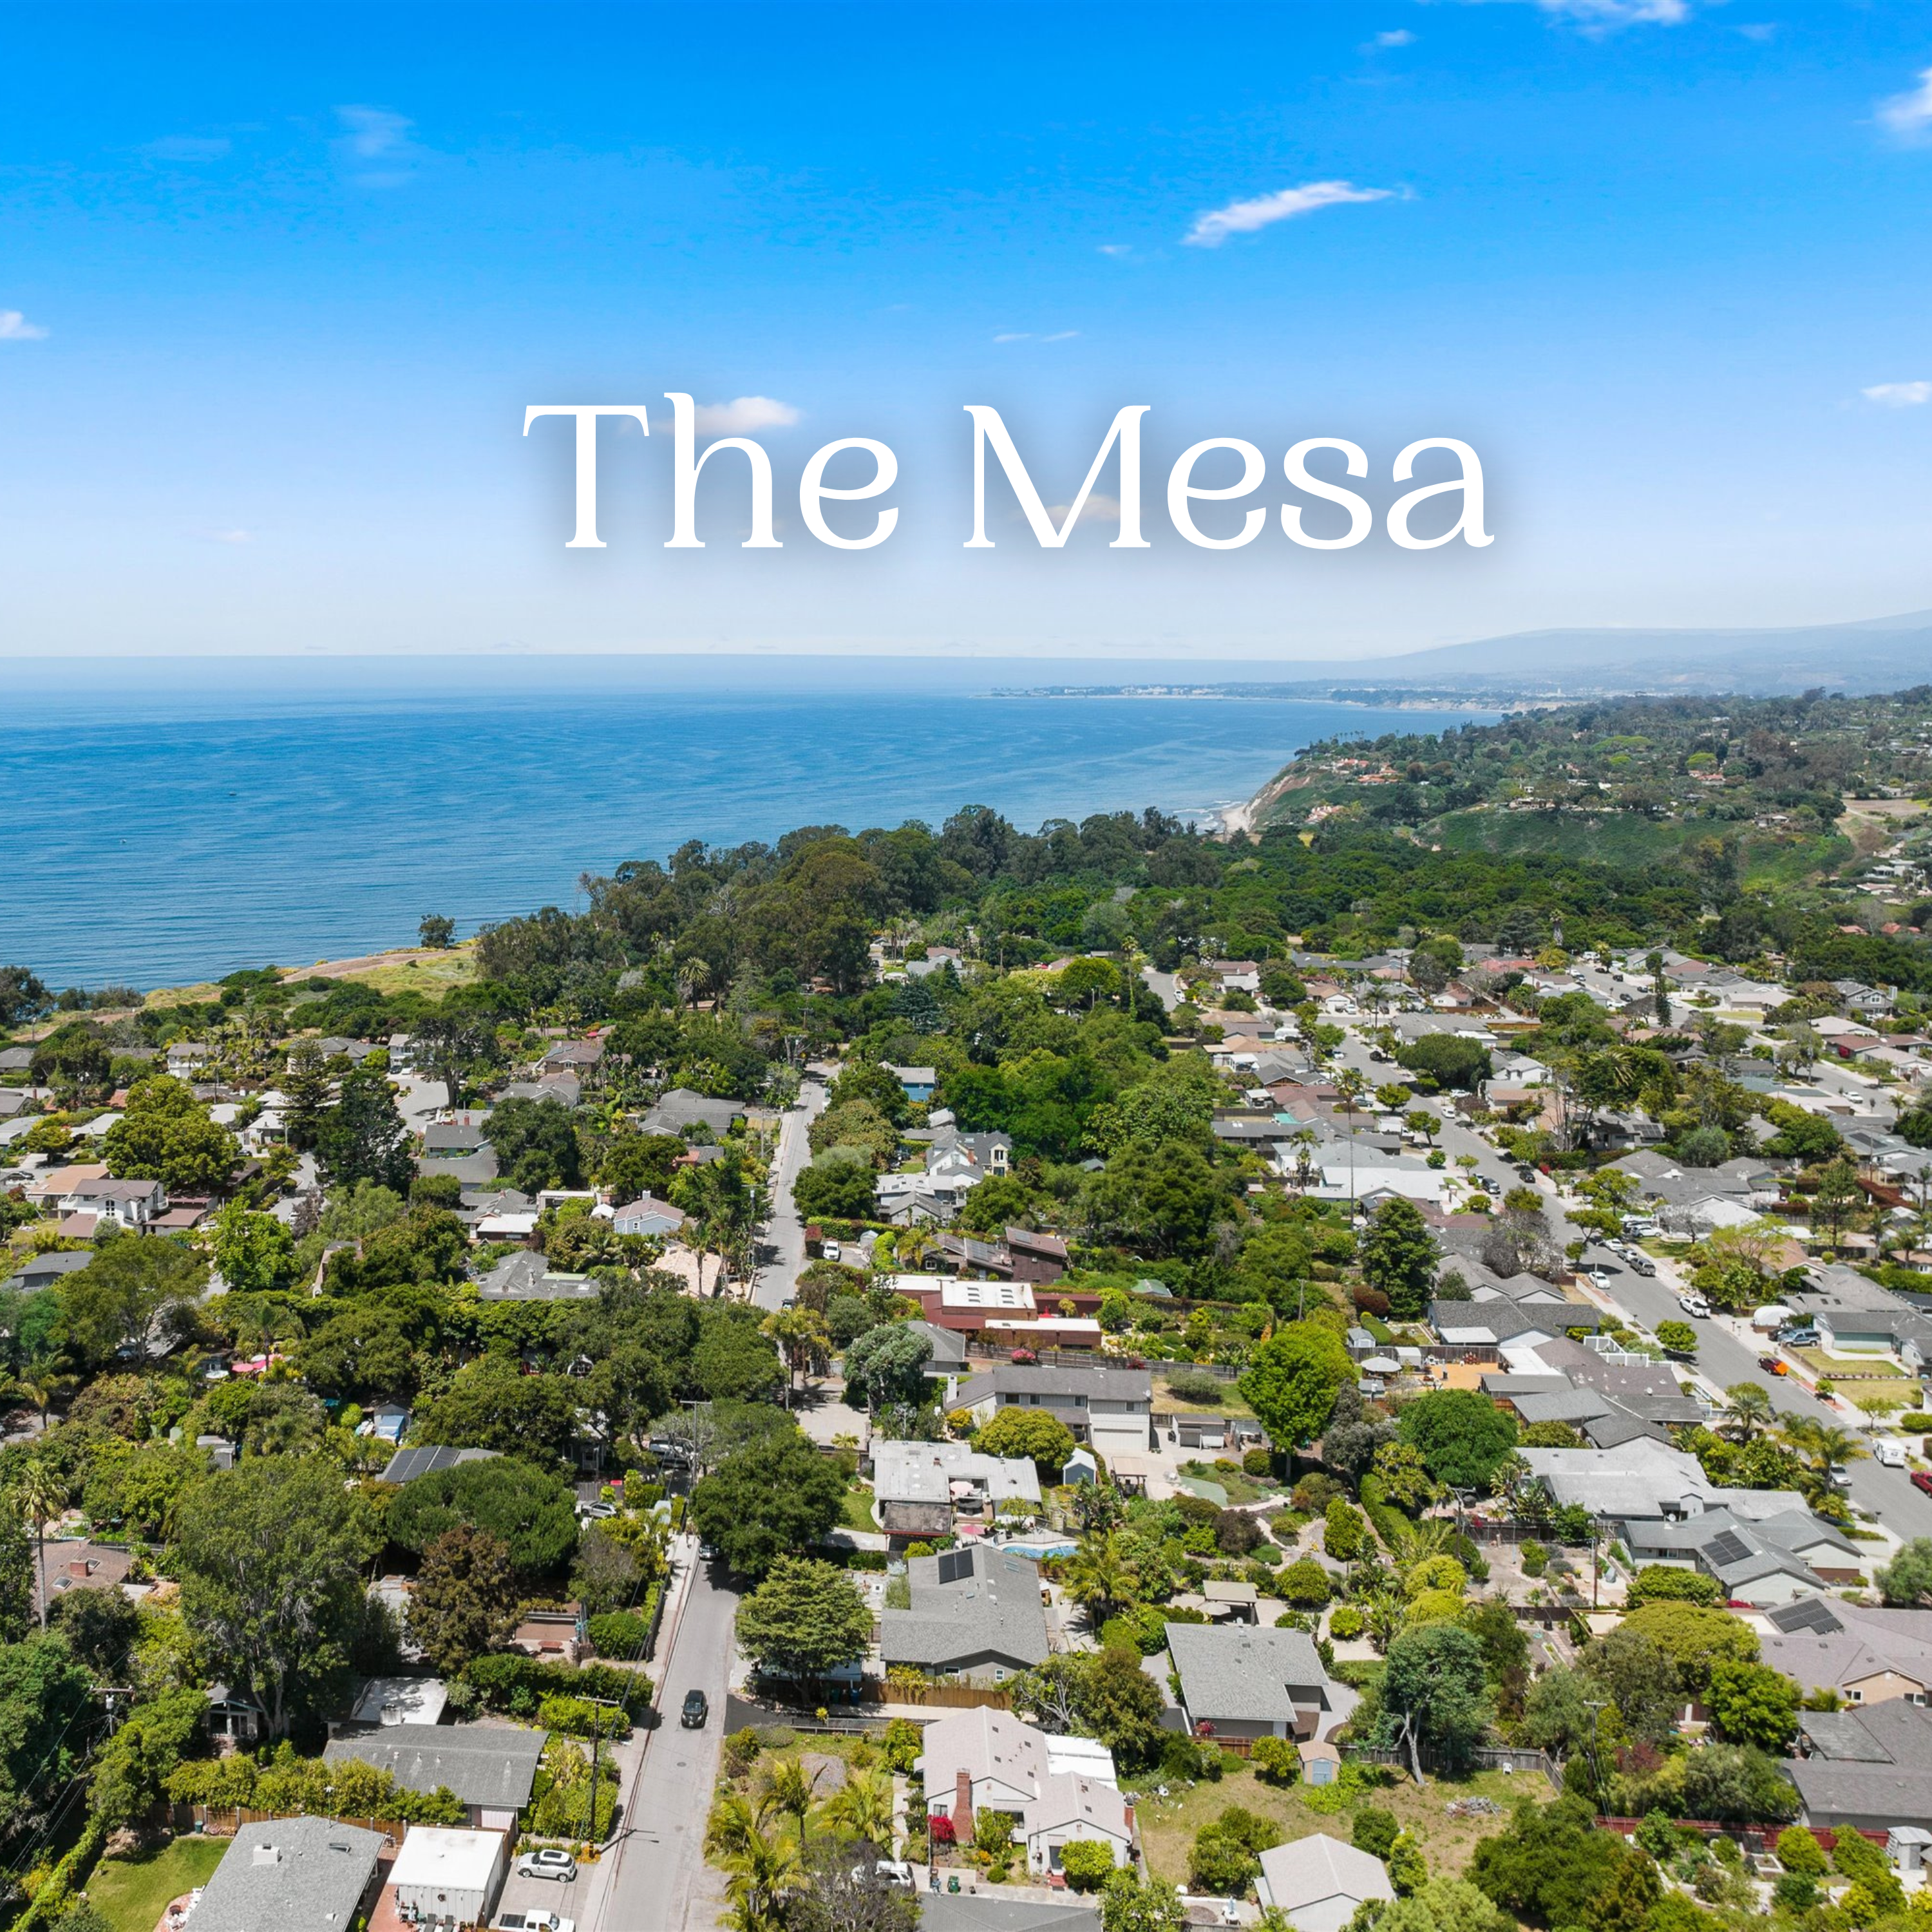 Episode 36: The History of The Mesa by Scott Williams